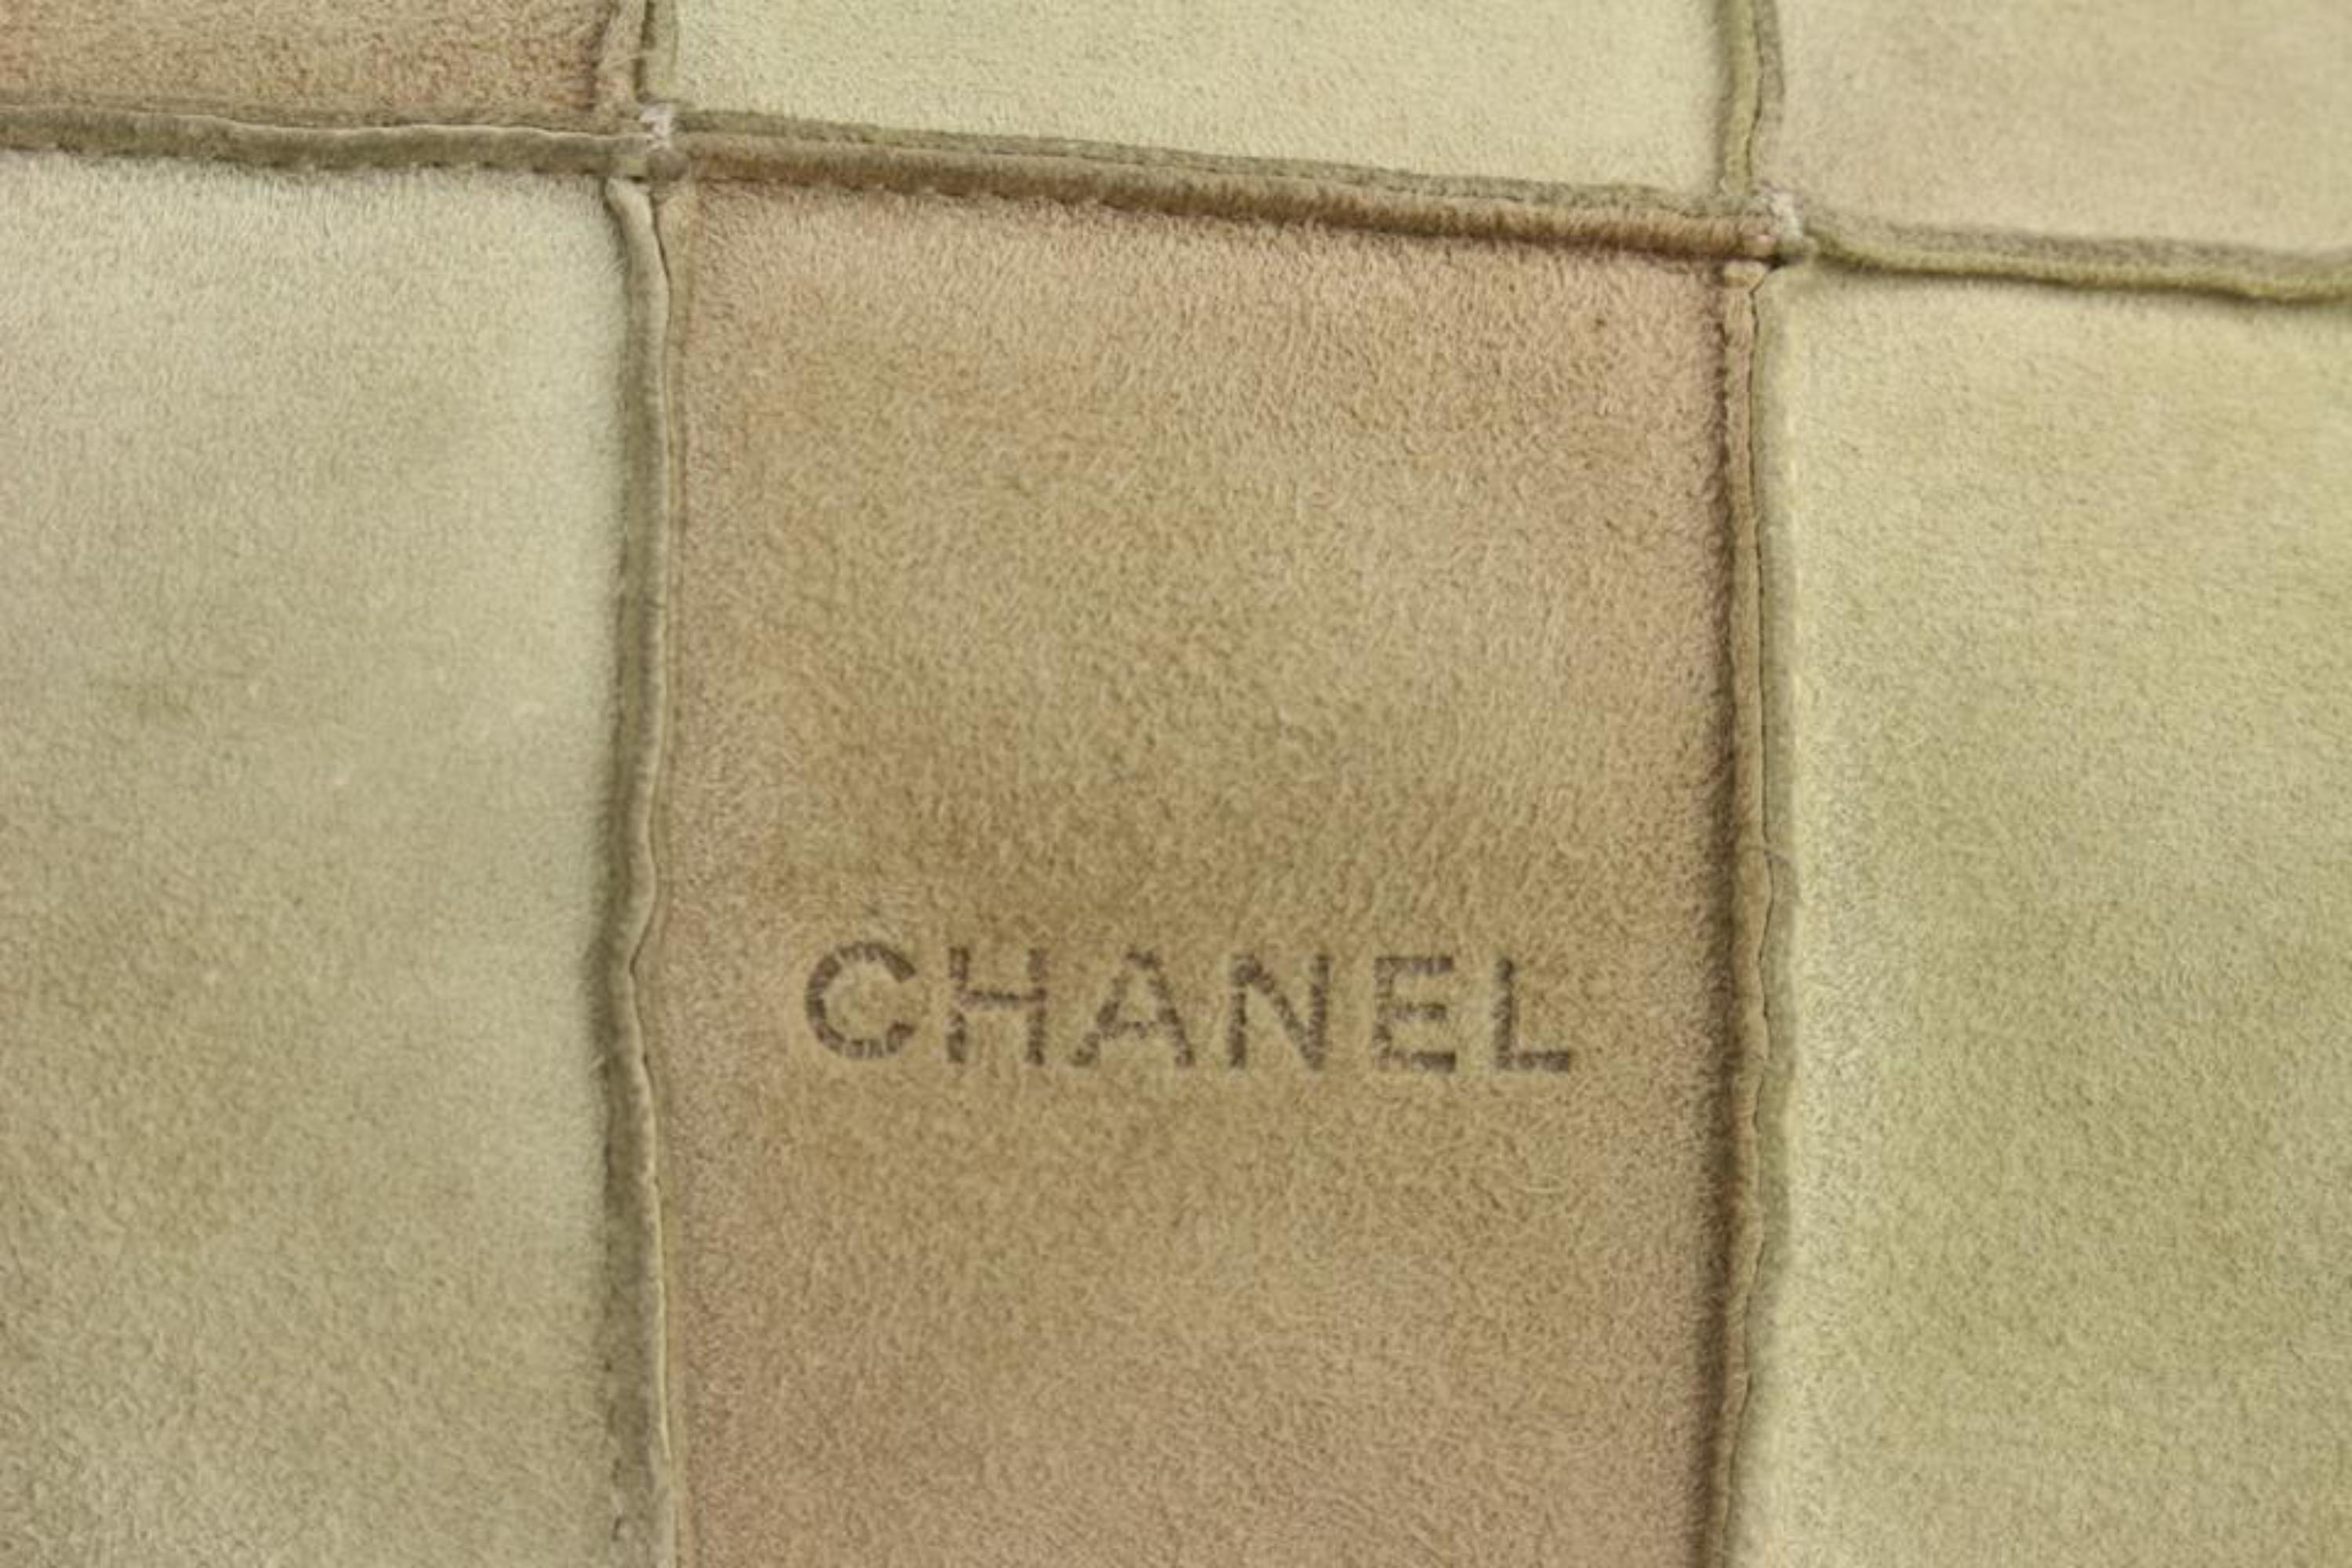 Chanel Beige Suede Patchwork Tote Bag 1130c11 In Good Condition For Sale In Dix hills, NY